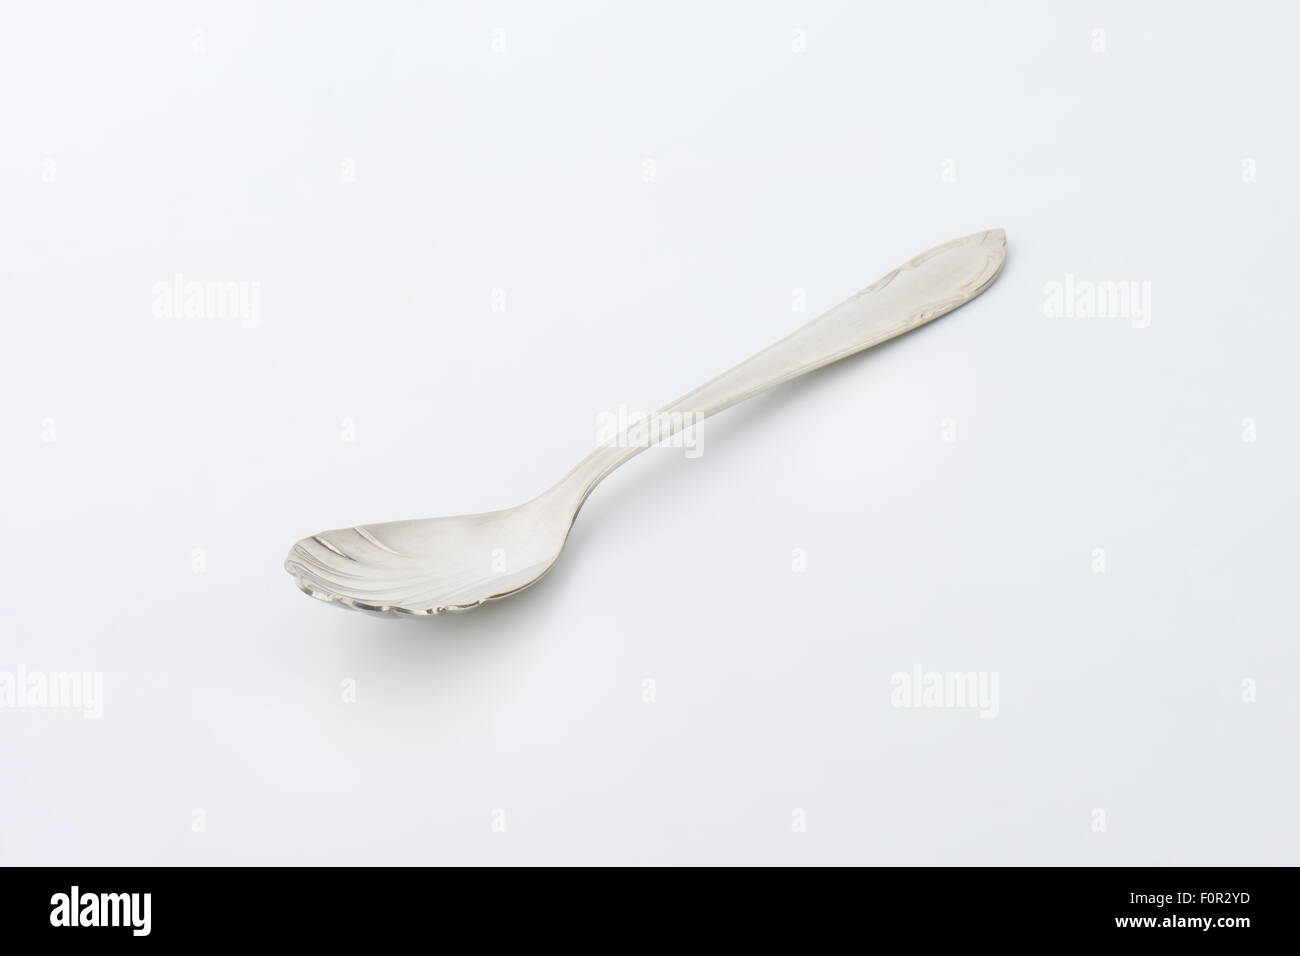 Cheese spoon with finely decorated cup and handle Stock Photo